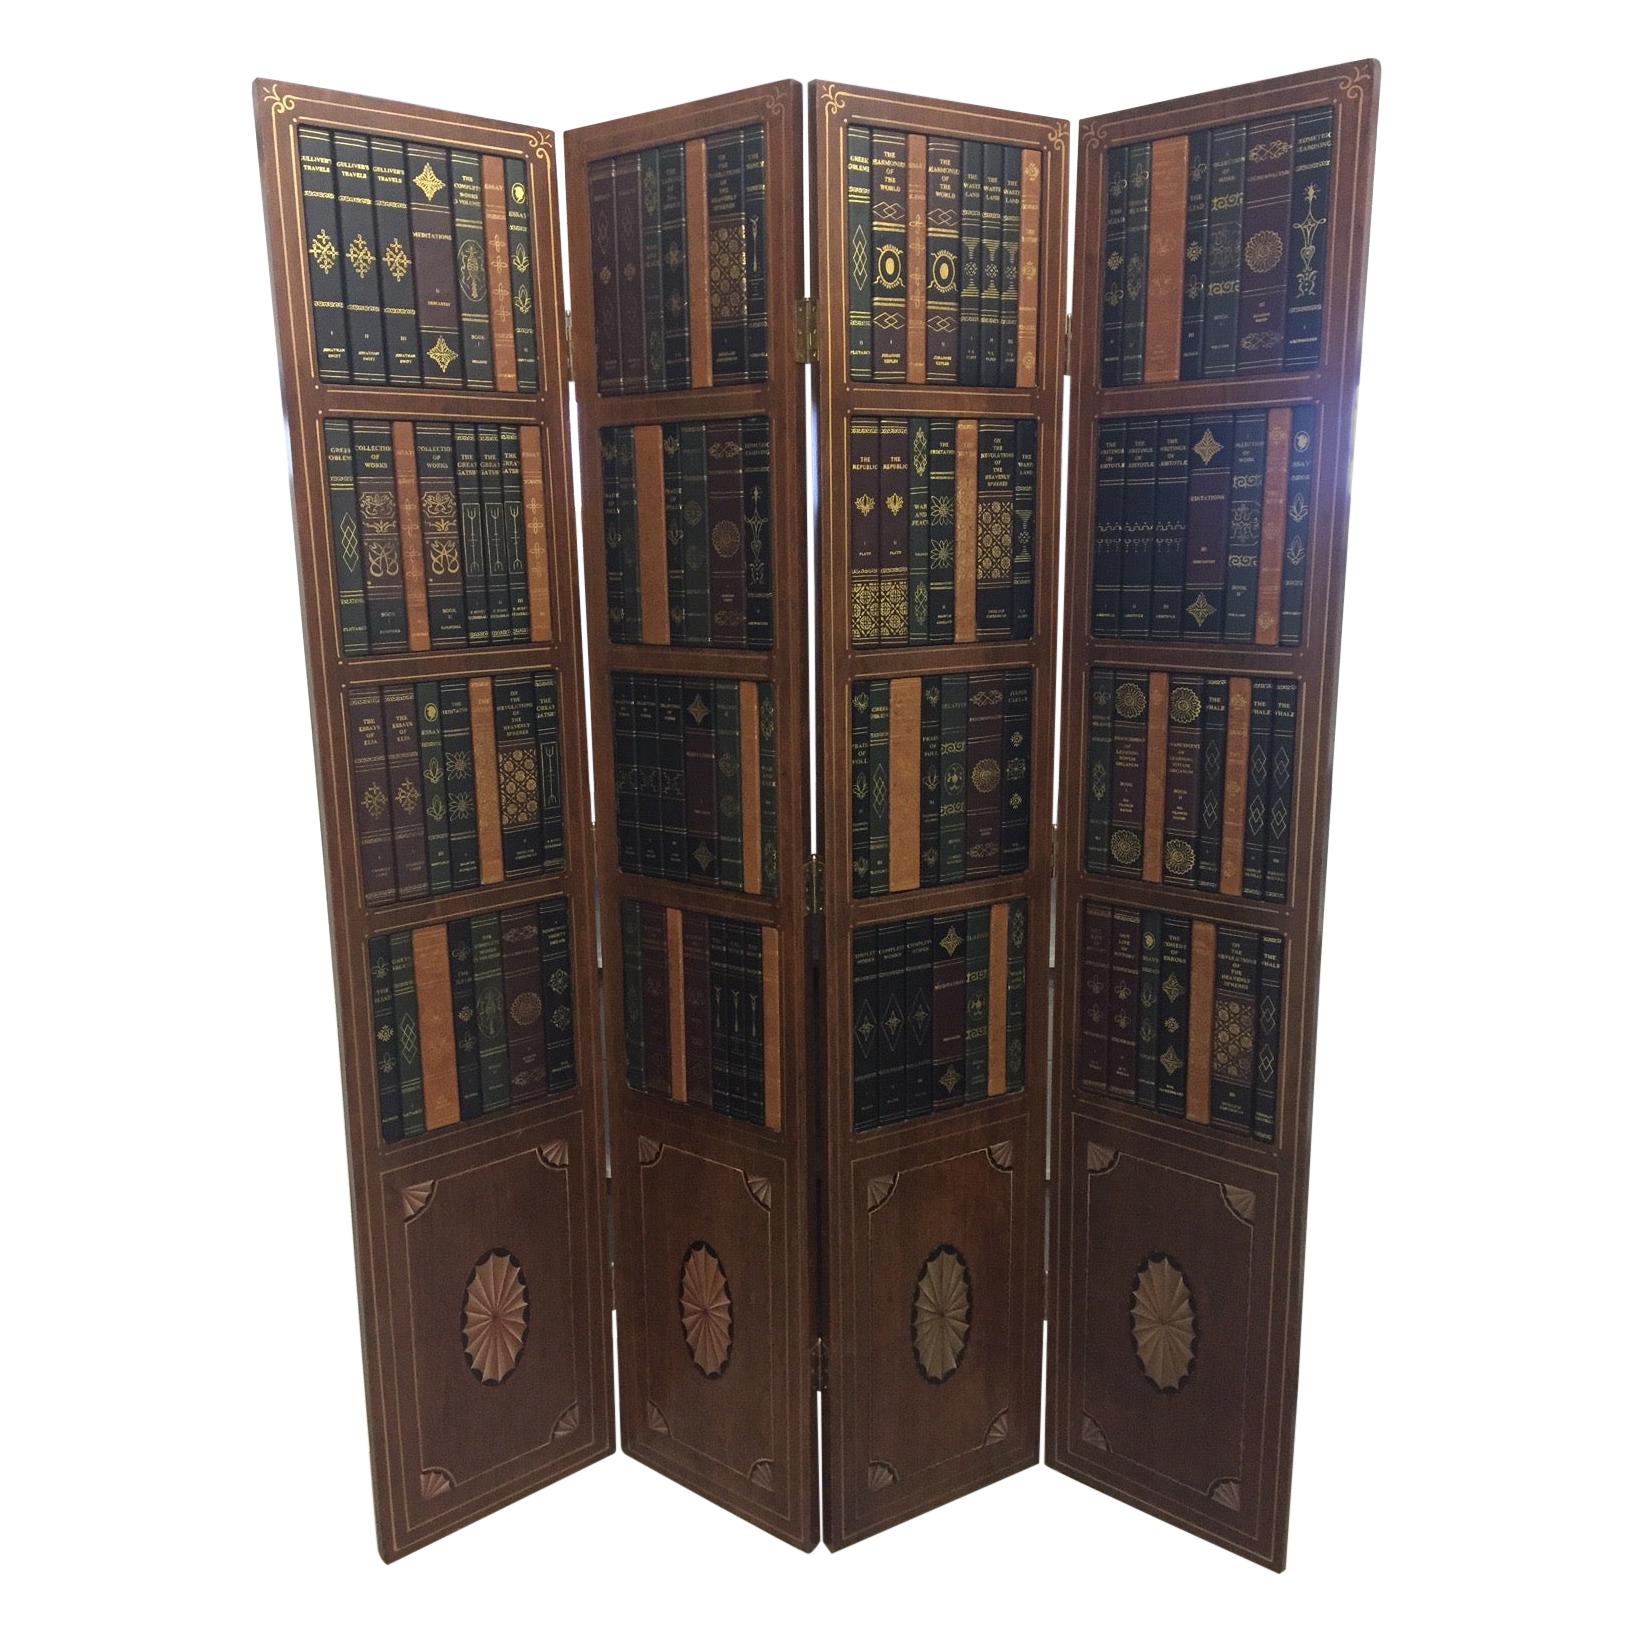 Gorgeous Tooled Leather and Wood Tromp l'oeil Book Motife Screen Room Divider